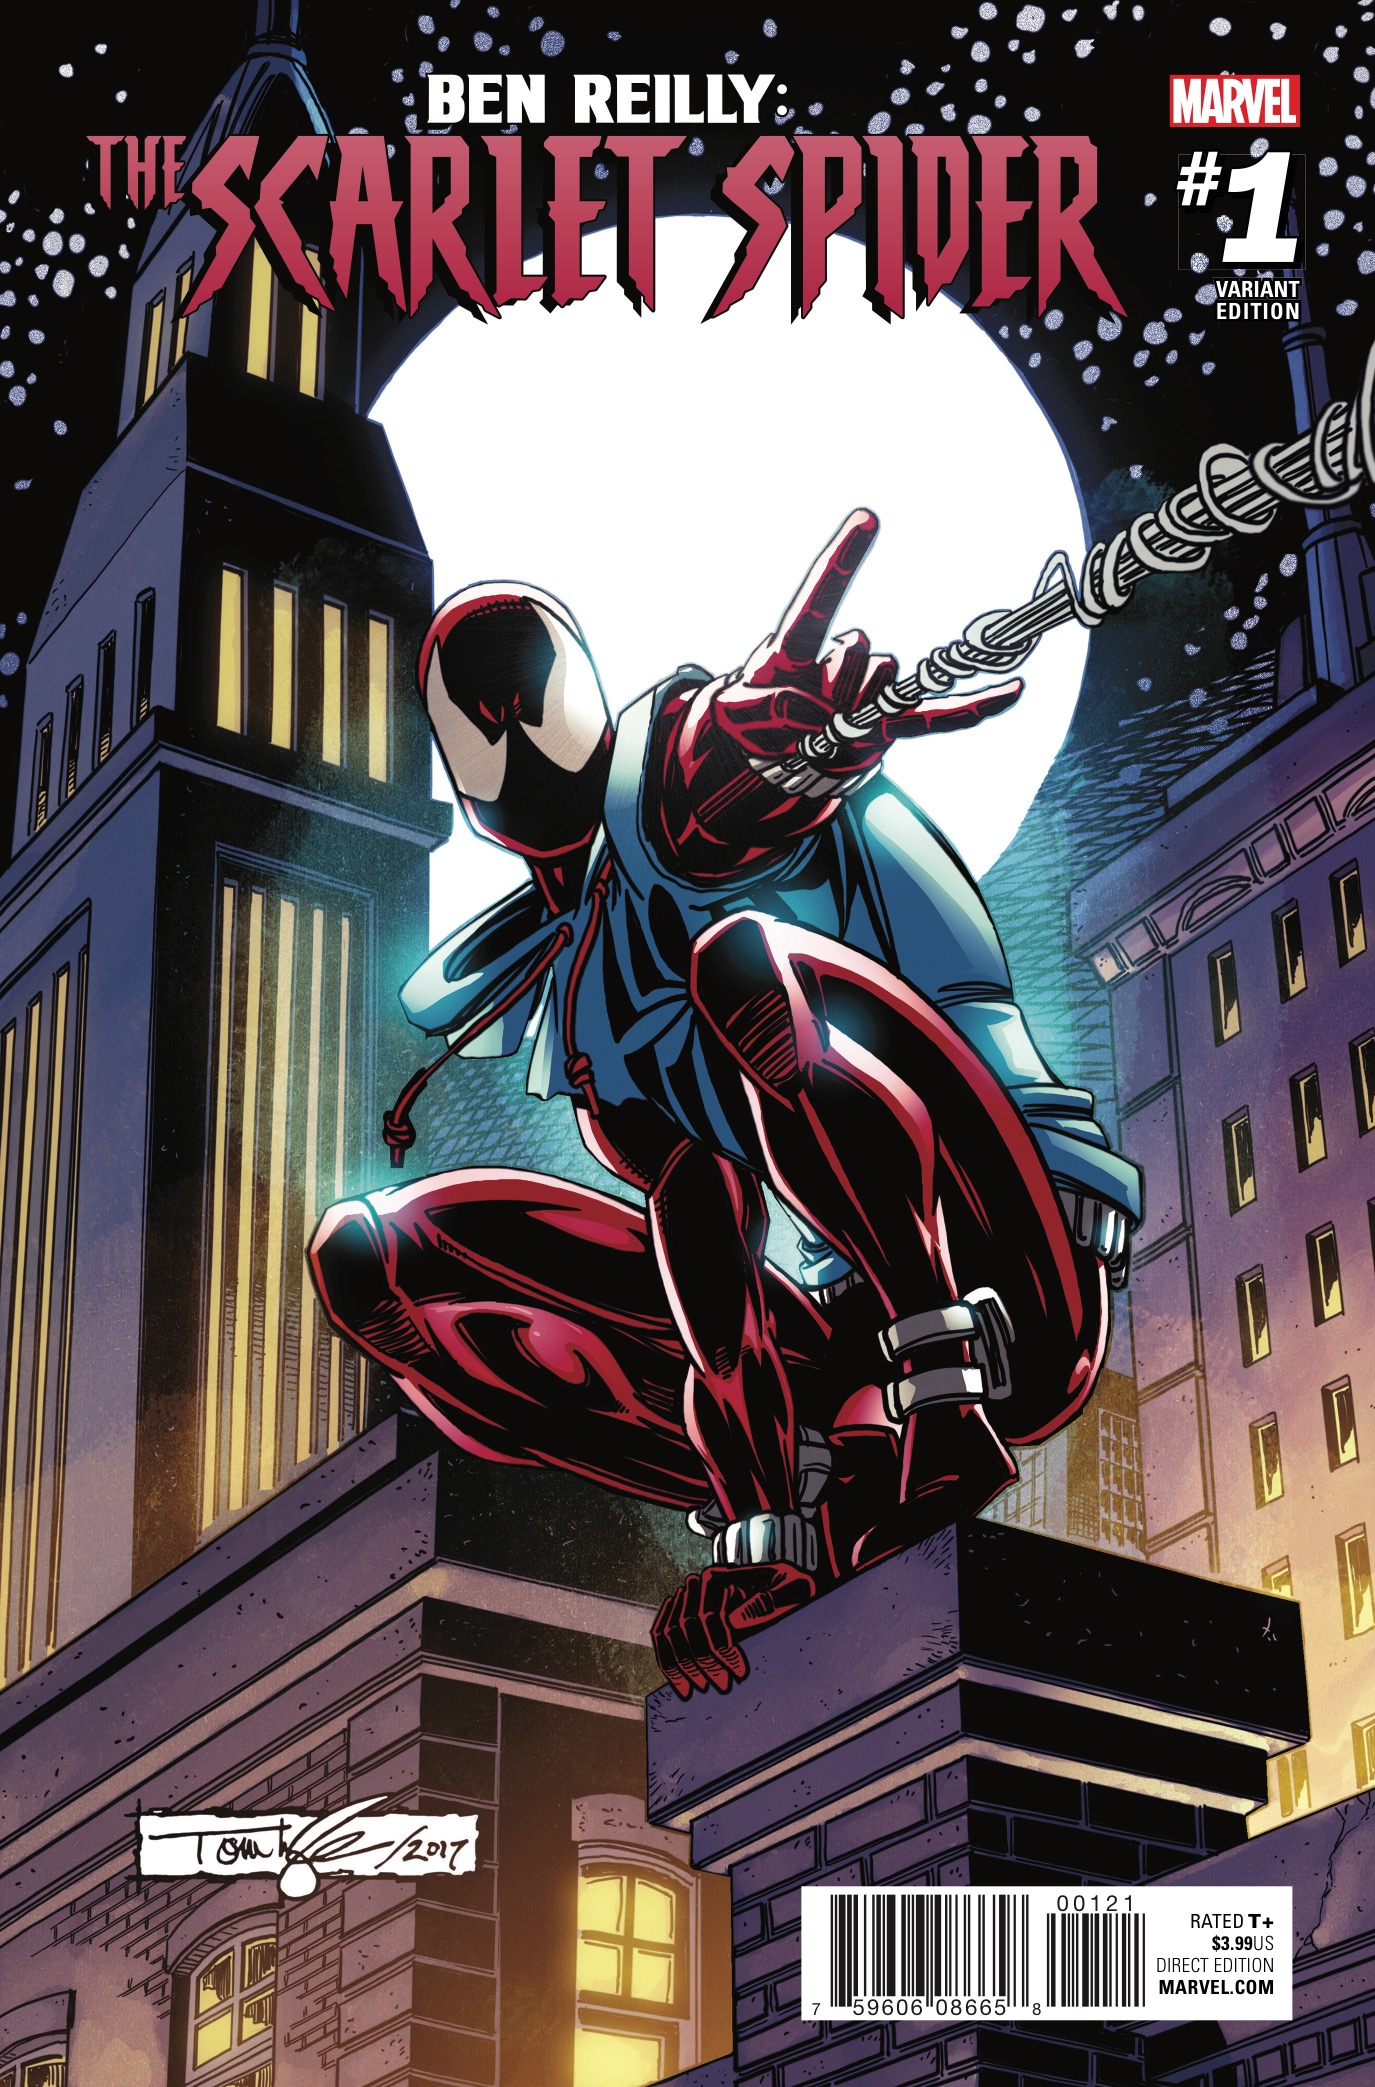 Marvel Preview: Ben Reilly: The Scarlet Spider #1